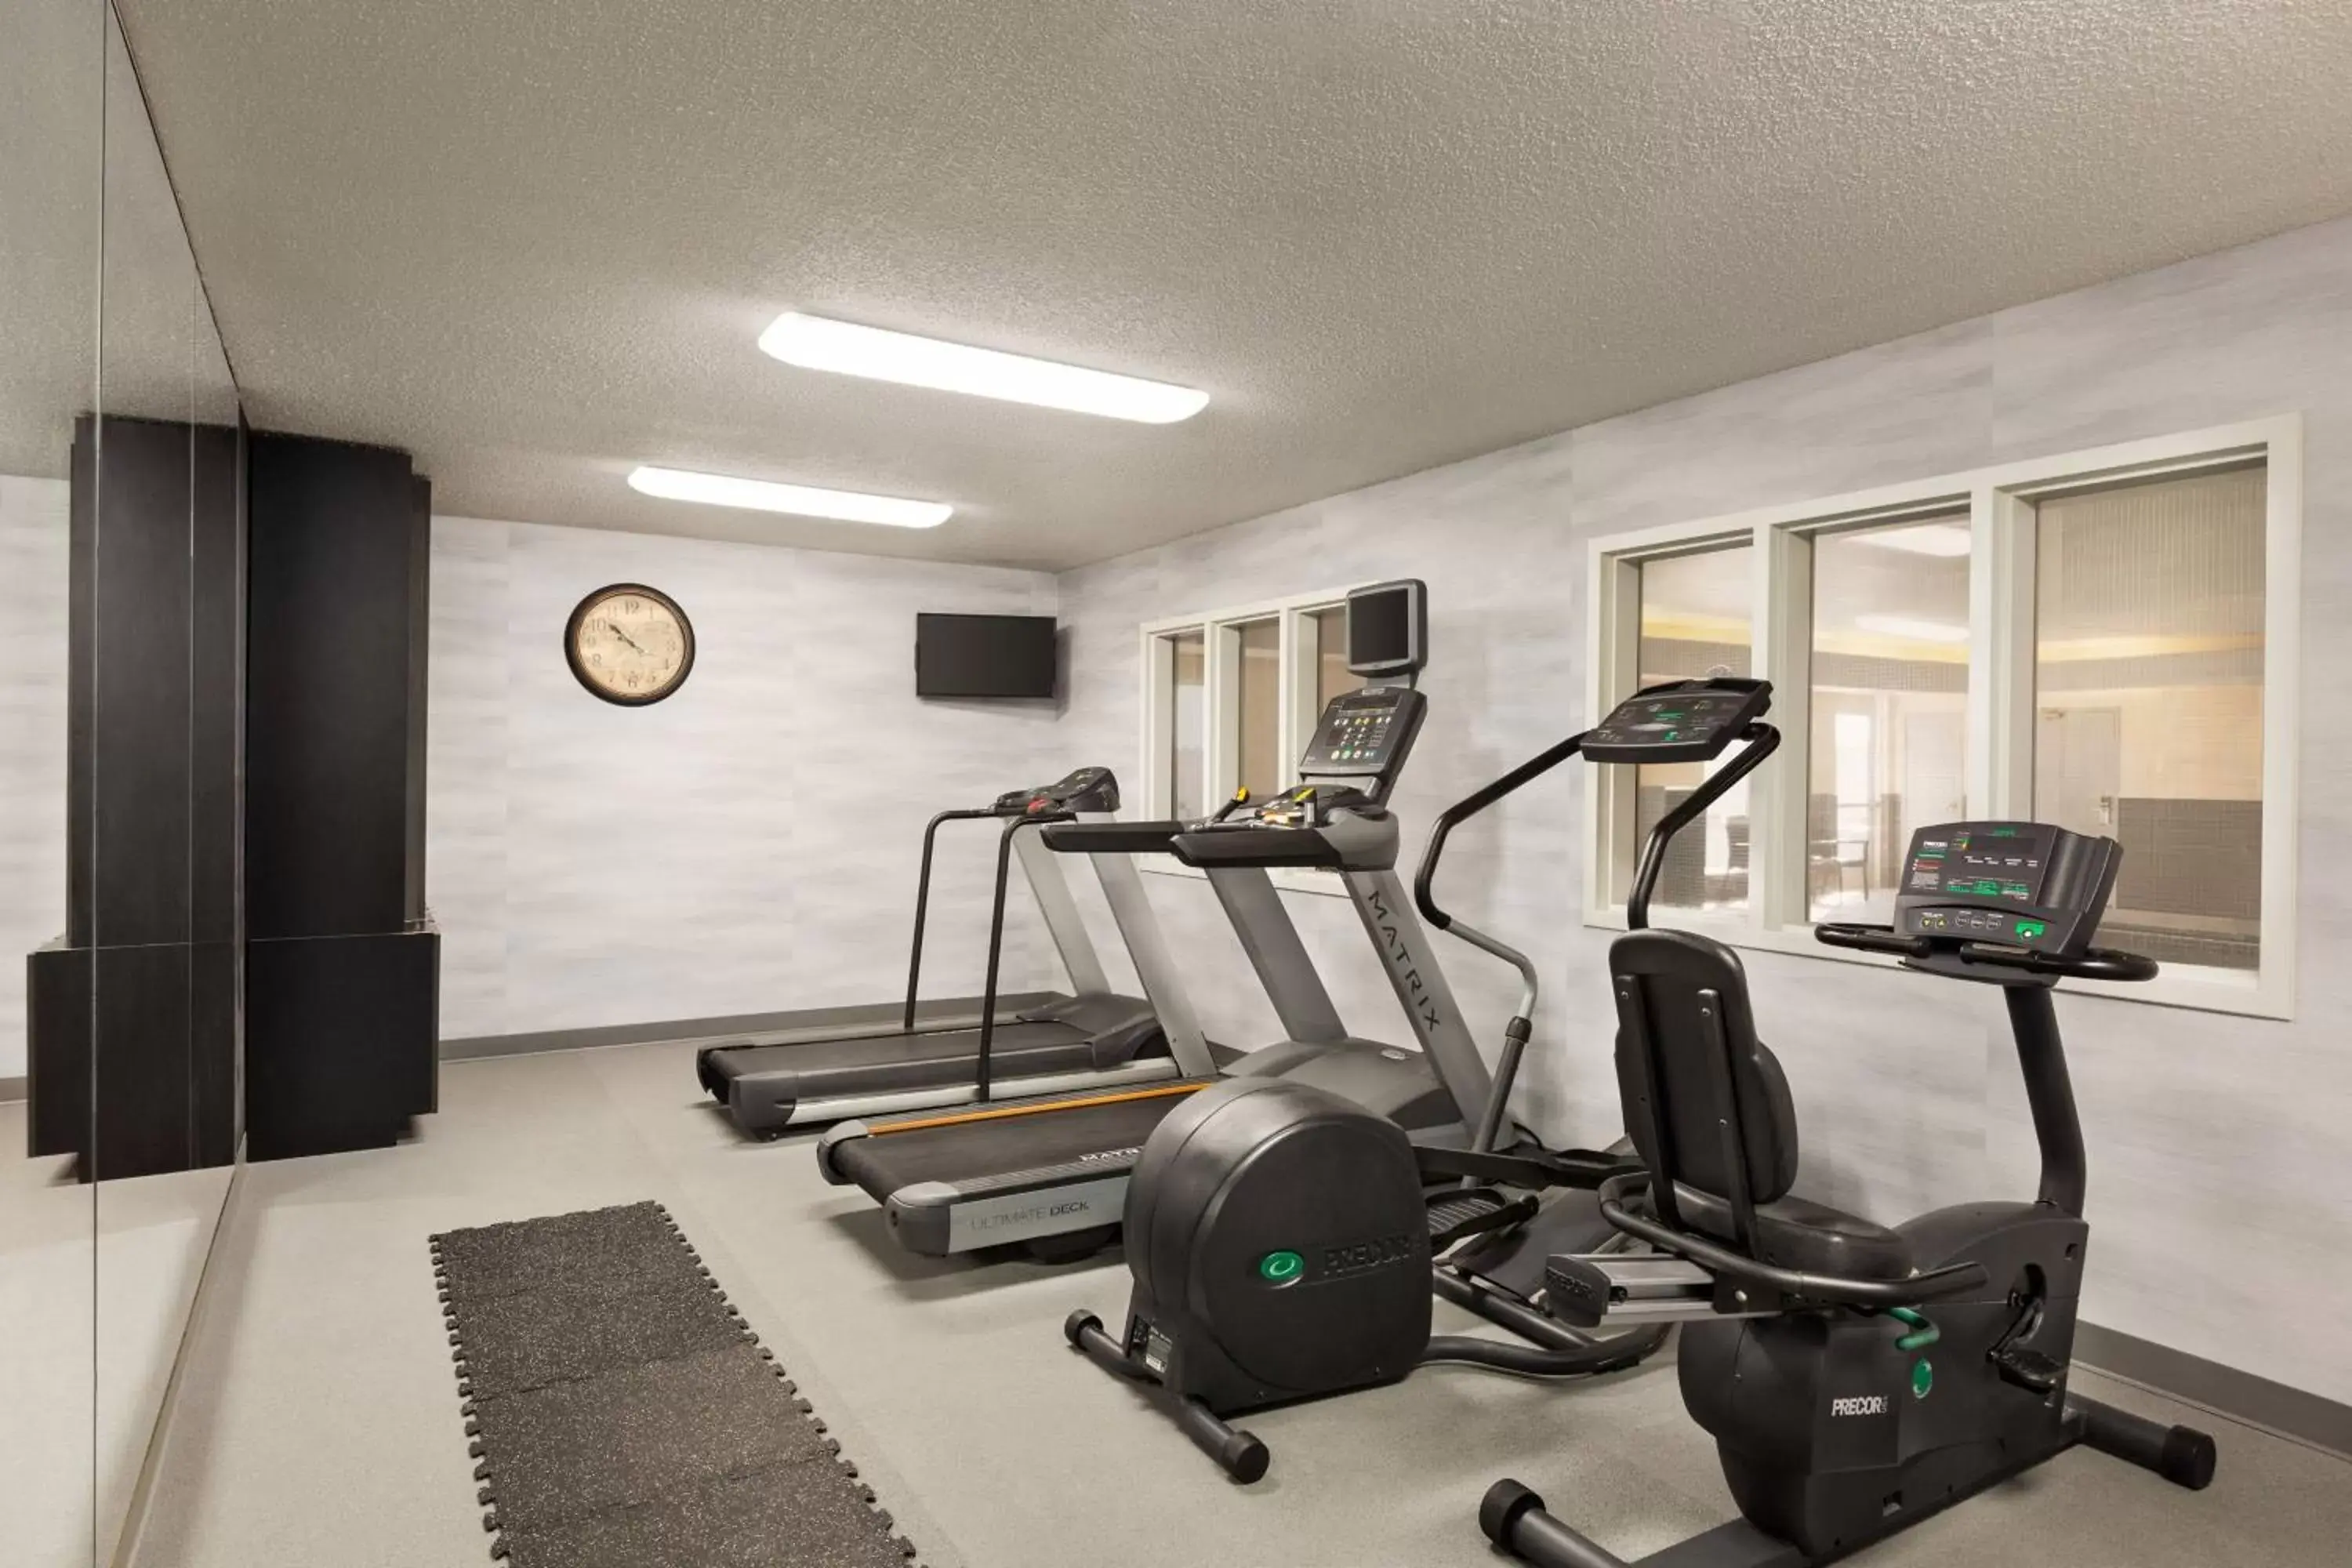 Fitness centre/facilities, Fitness Center/Facilities in Fairfield Inn & Suites Wheeling - St. Clairsville, OH